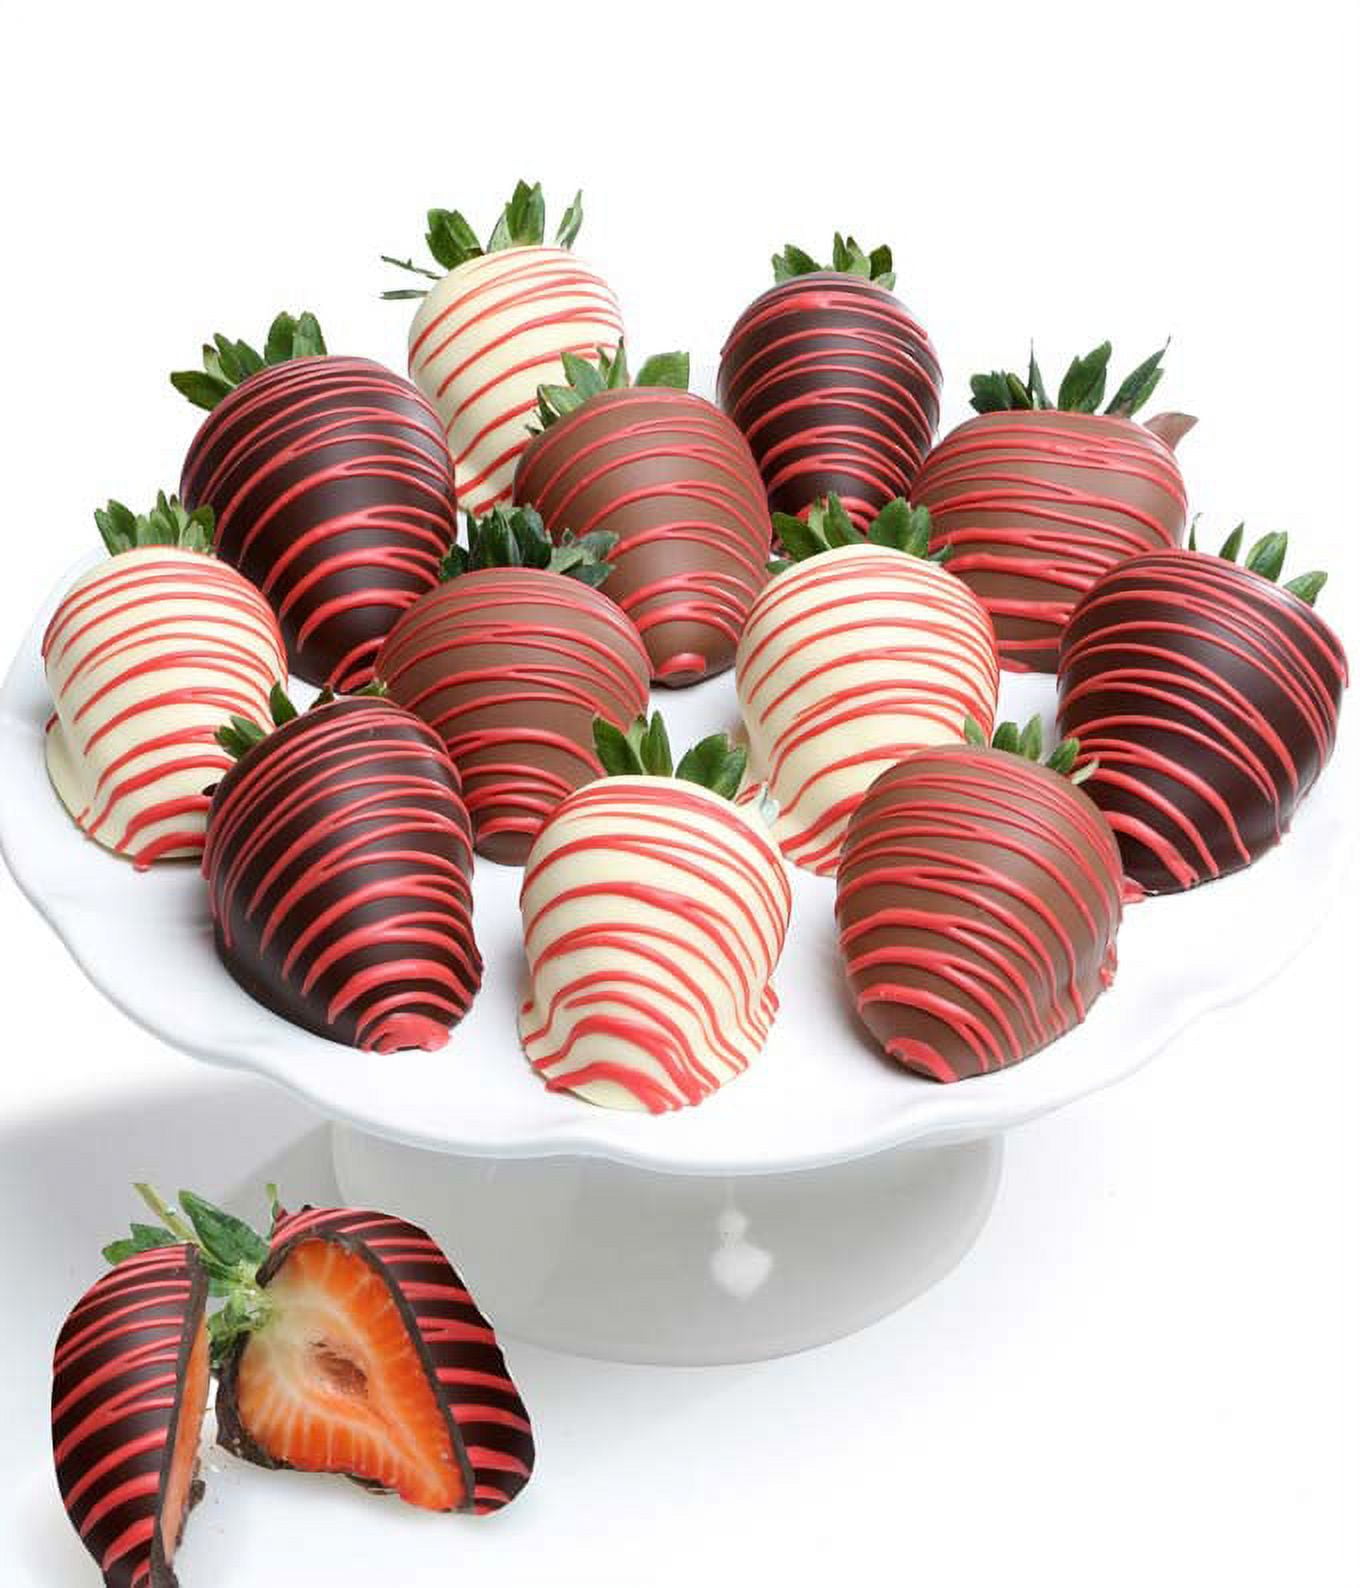 From You Flowers - Rainbow Chocolate Covered Strawberries 